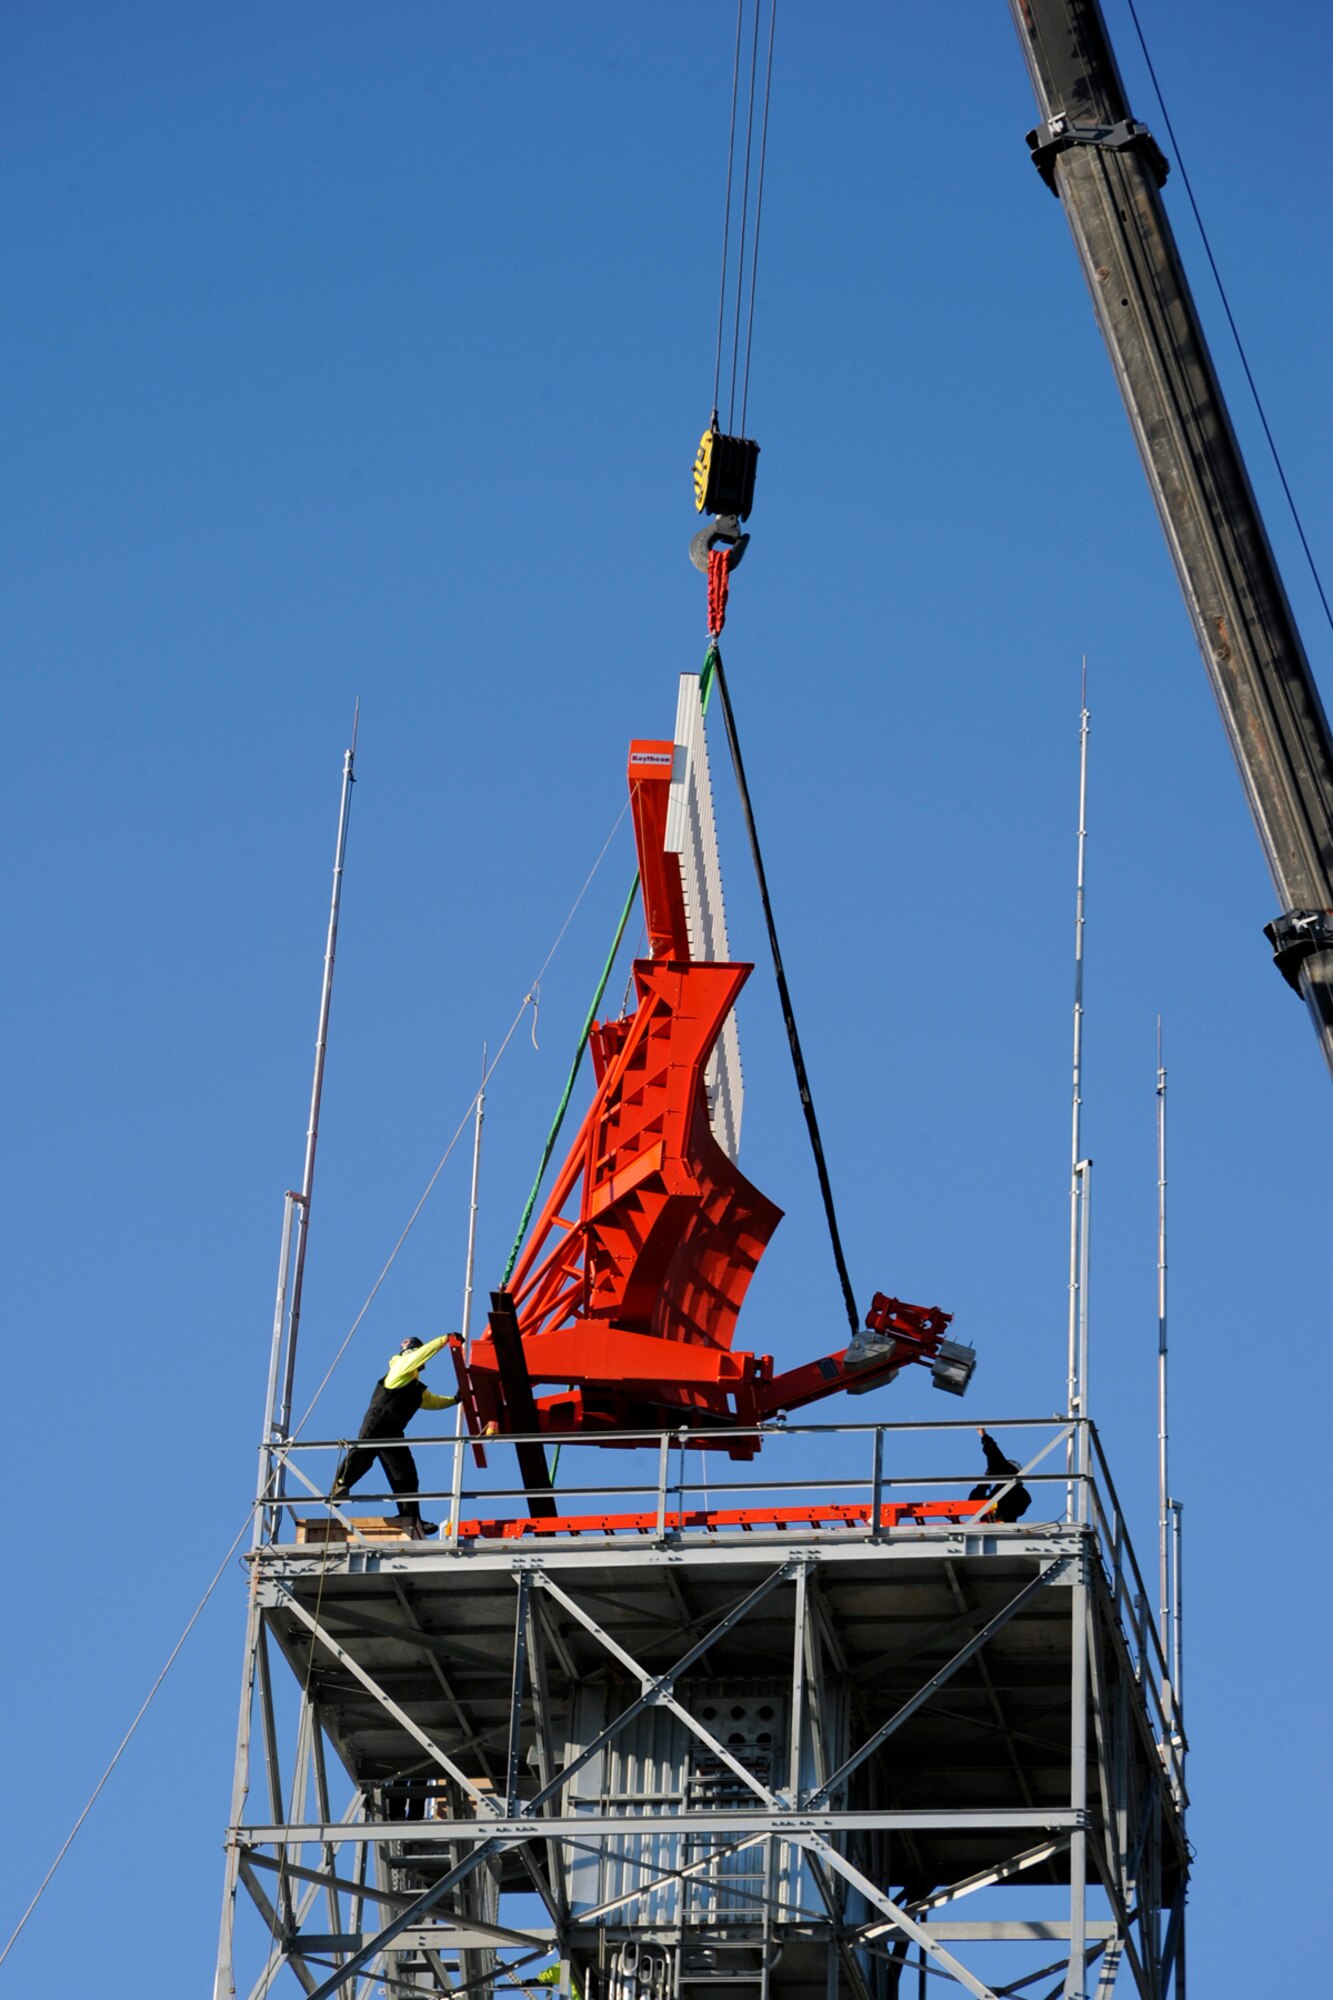 The radar unit of a new DAS-R -- digital airport surveillance radar – is lifted onto a newly-constructed tower at Selfridge Air National Guard Base, Mich., Oct. 12, 2012. The new $17 million system will become operation in 2013, replacing an older system in use on the base. The new tower 94-foot tower is more than two dozen feet taller than the older, existing radar tower on the base. (Air National Guard photo by John S. Swanson)